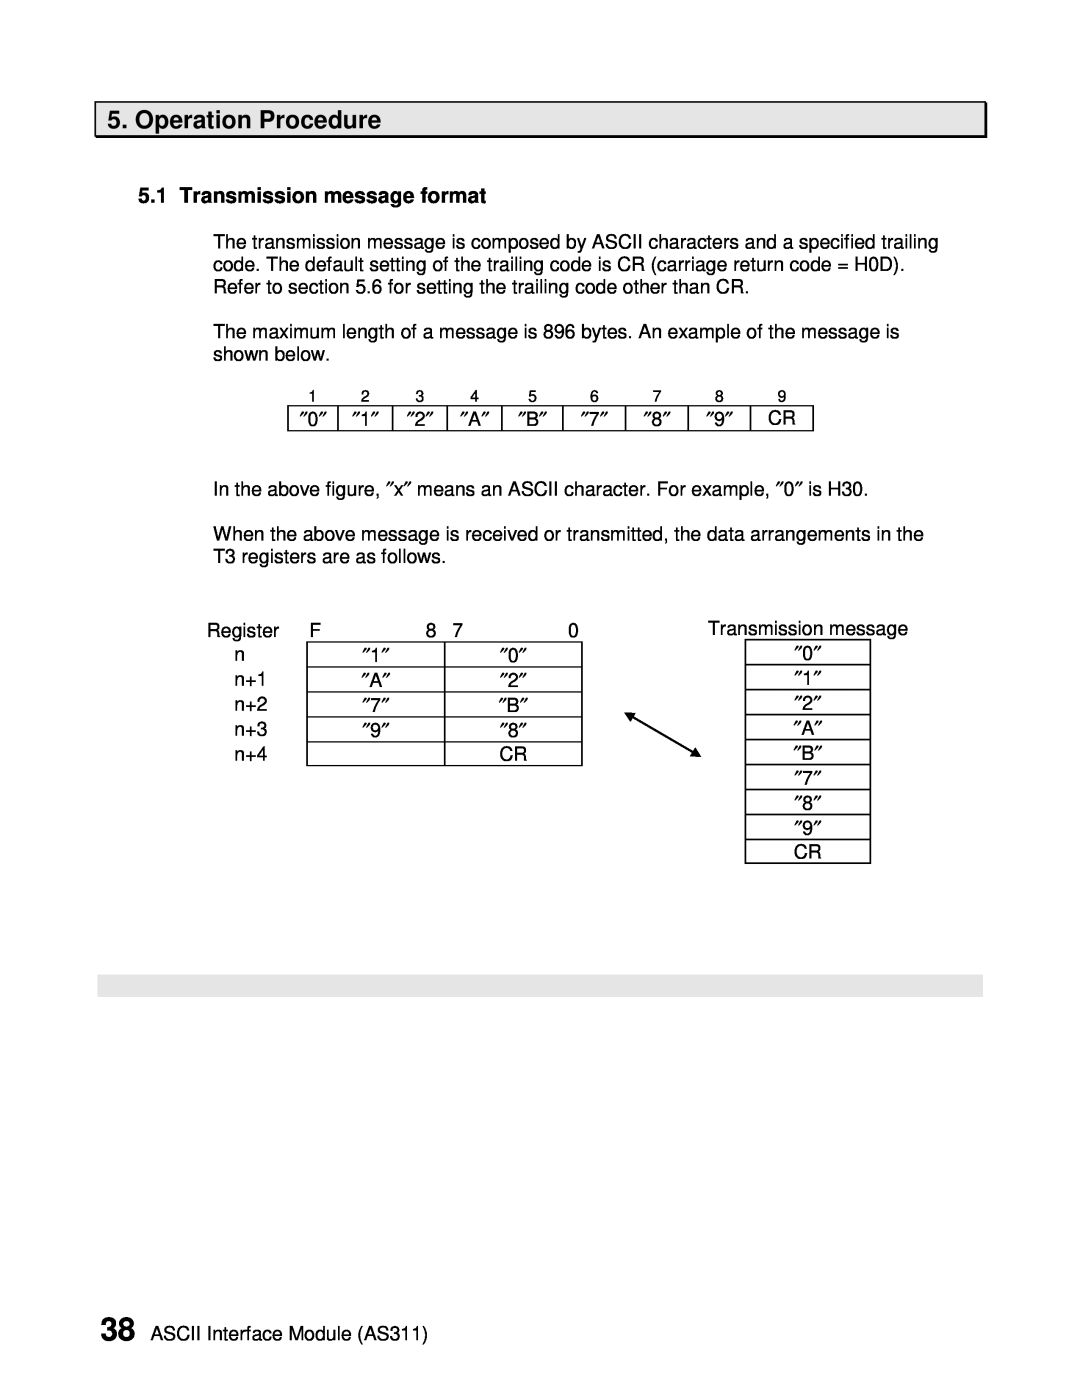 Toshiba AS311 user manual Operation Procedure, Transmission message format 